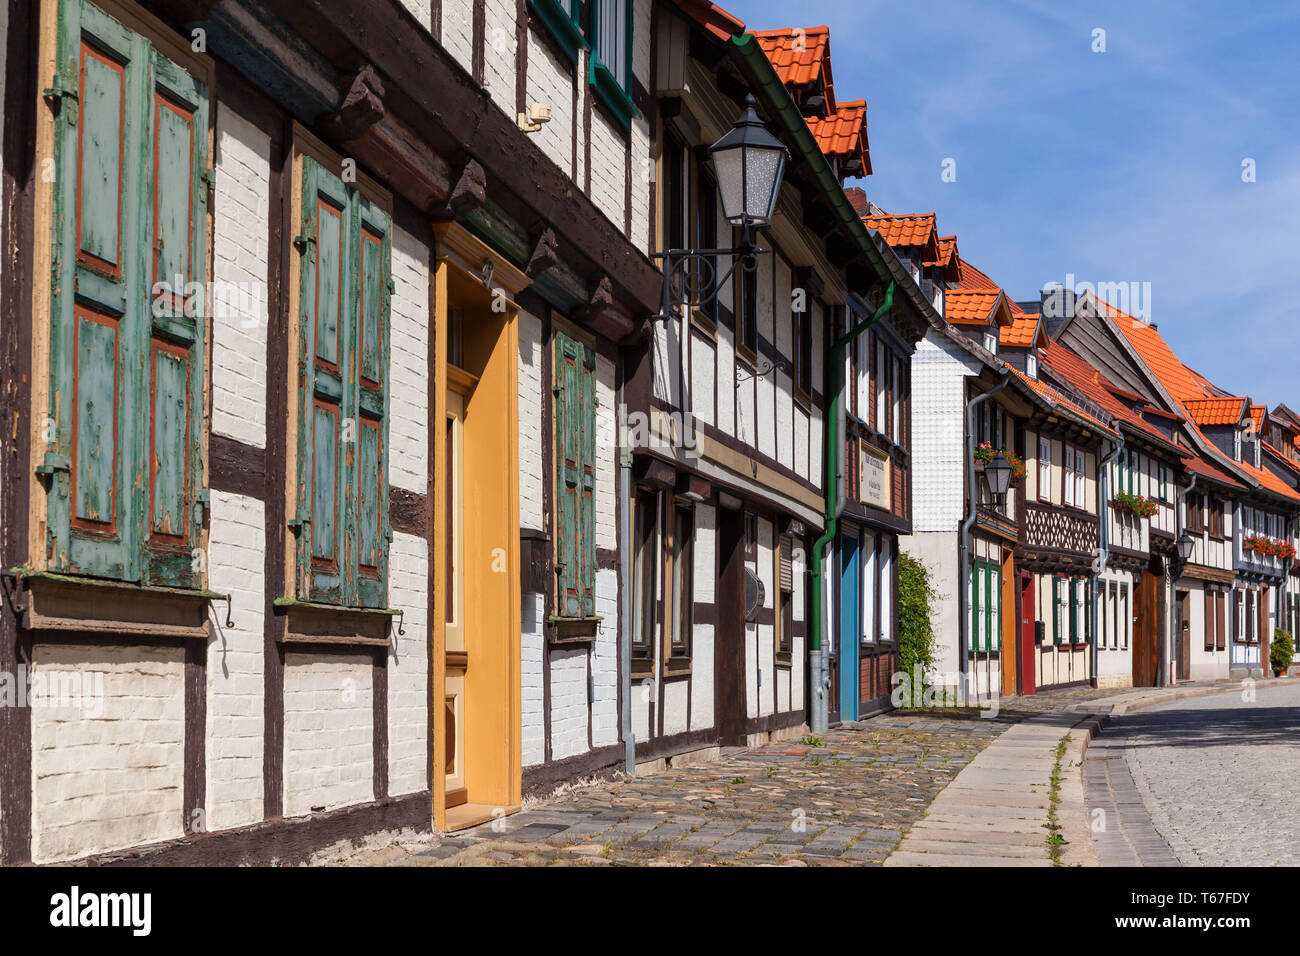 Historic City of werningerode, Harz, Central Germany Stock Photo